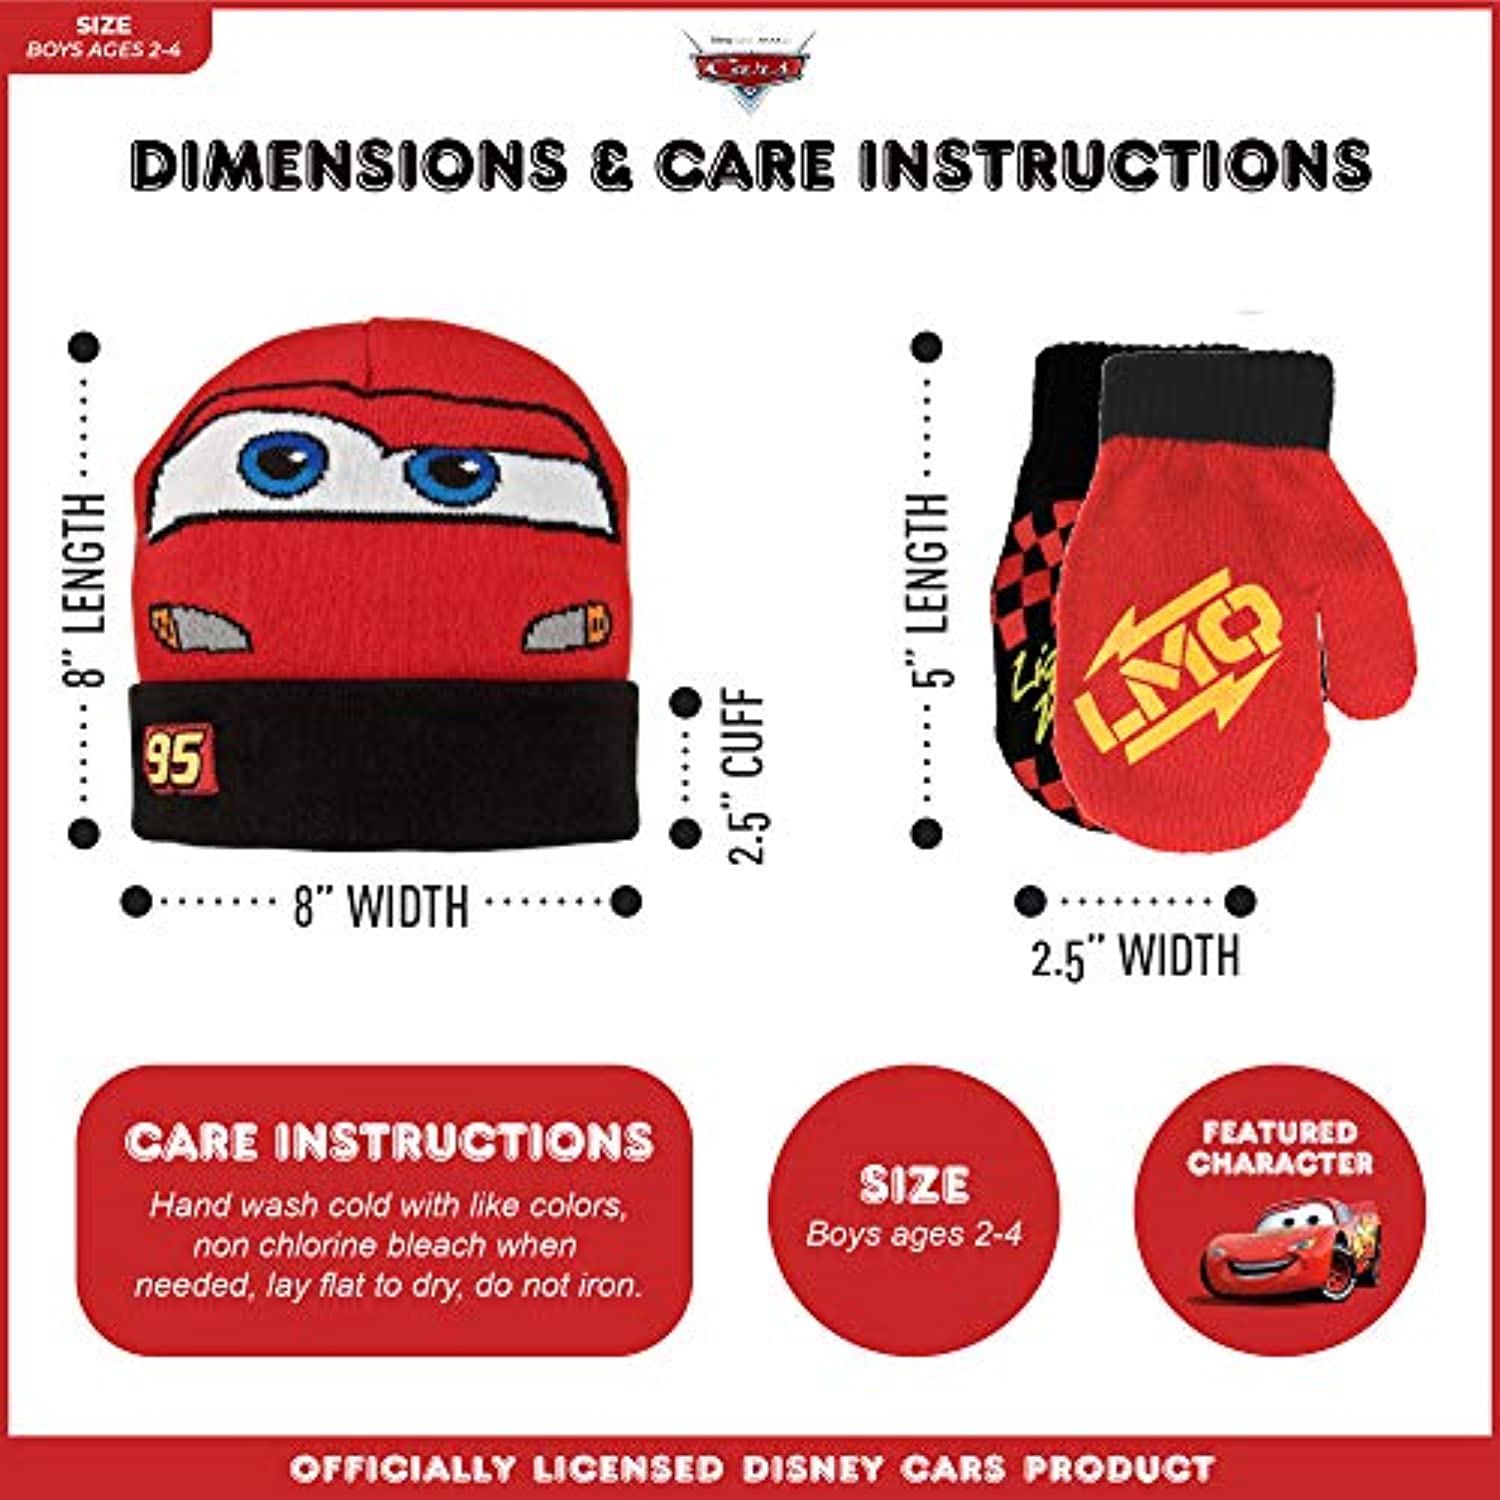 Disney Toddler Winter, Kids Gloves or Toddlers Mittens, Lightning McQueen Reversible Hat for Boy Ages 2-4 - image 2 of 3